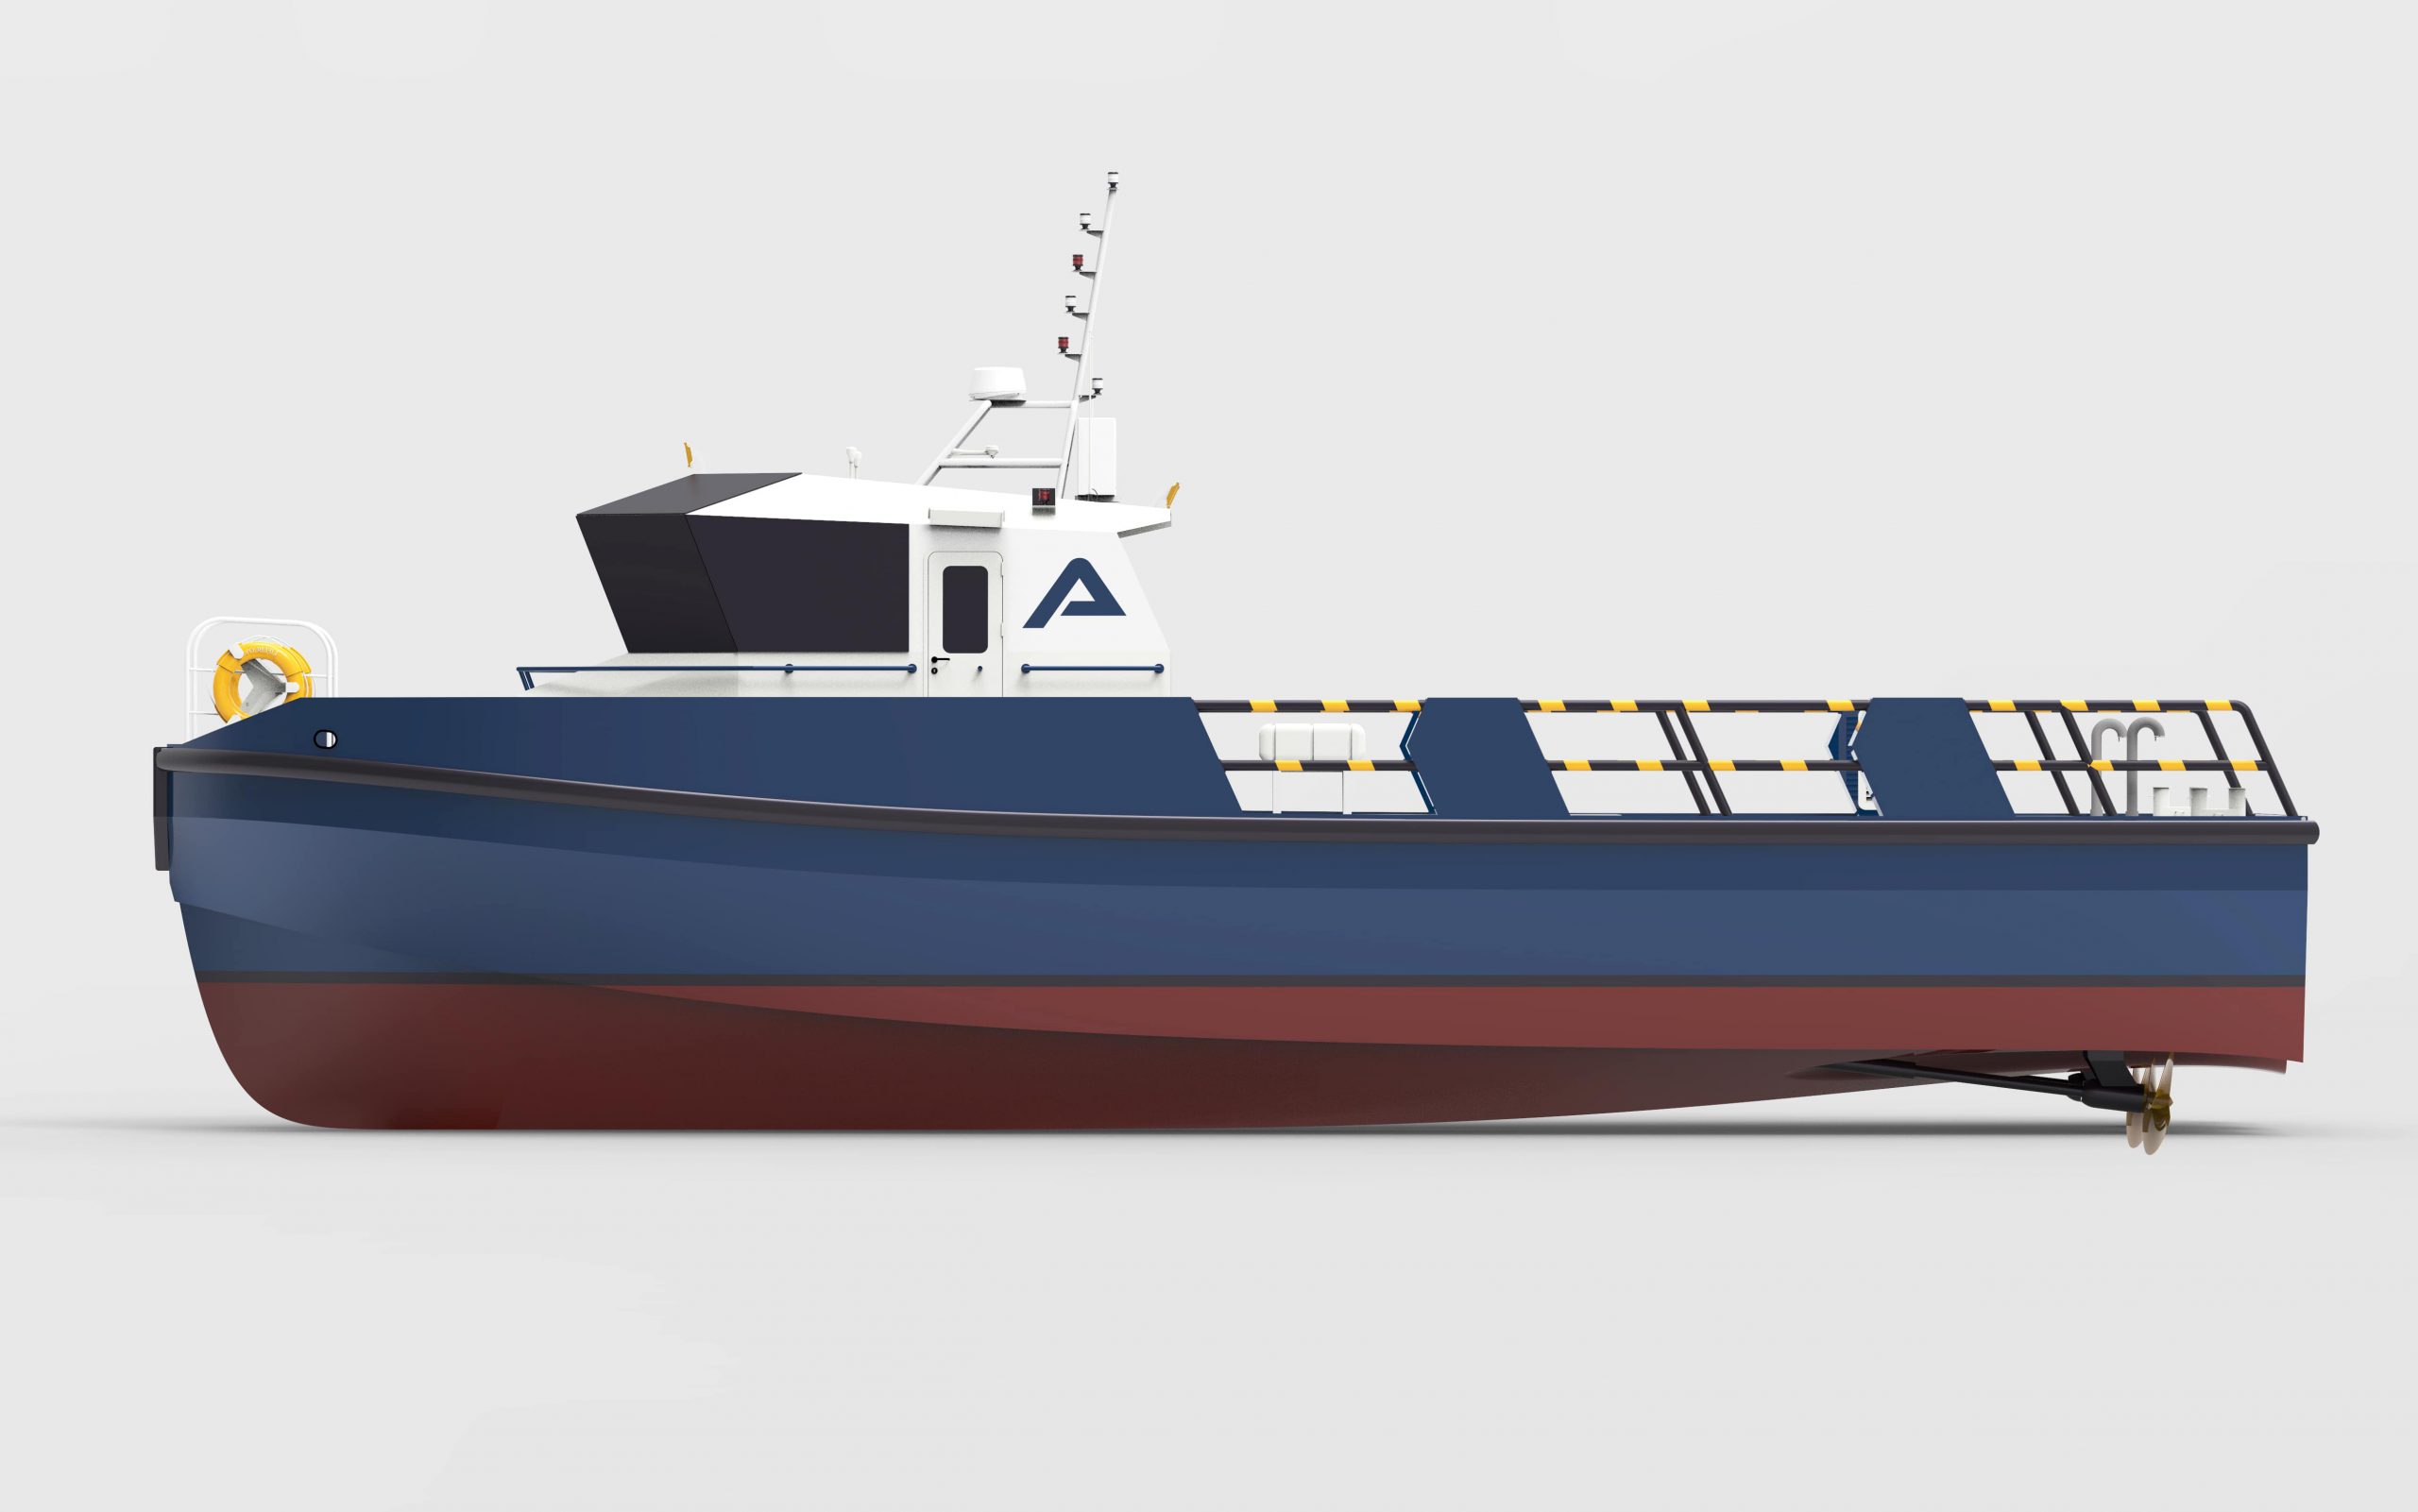 Support & Utility Vessel